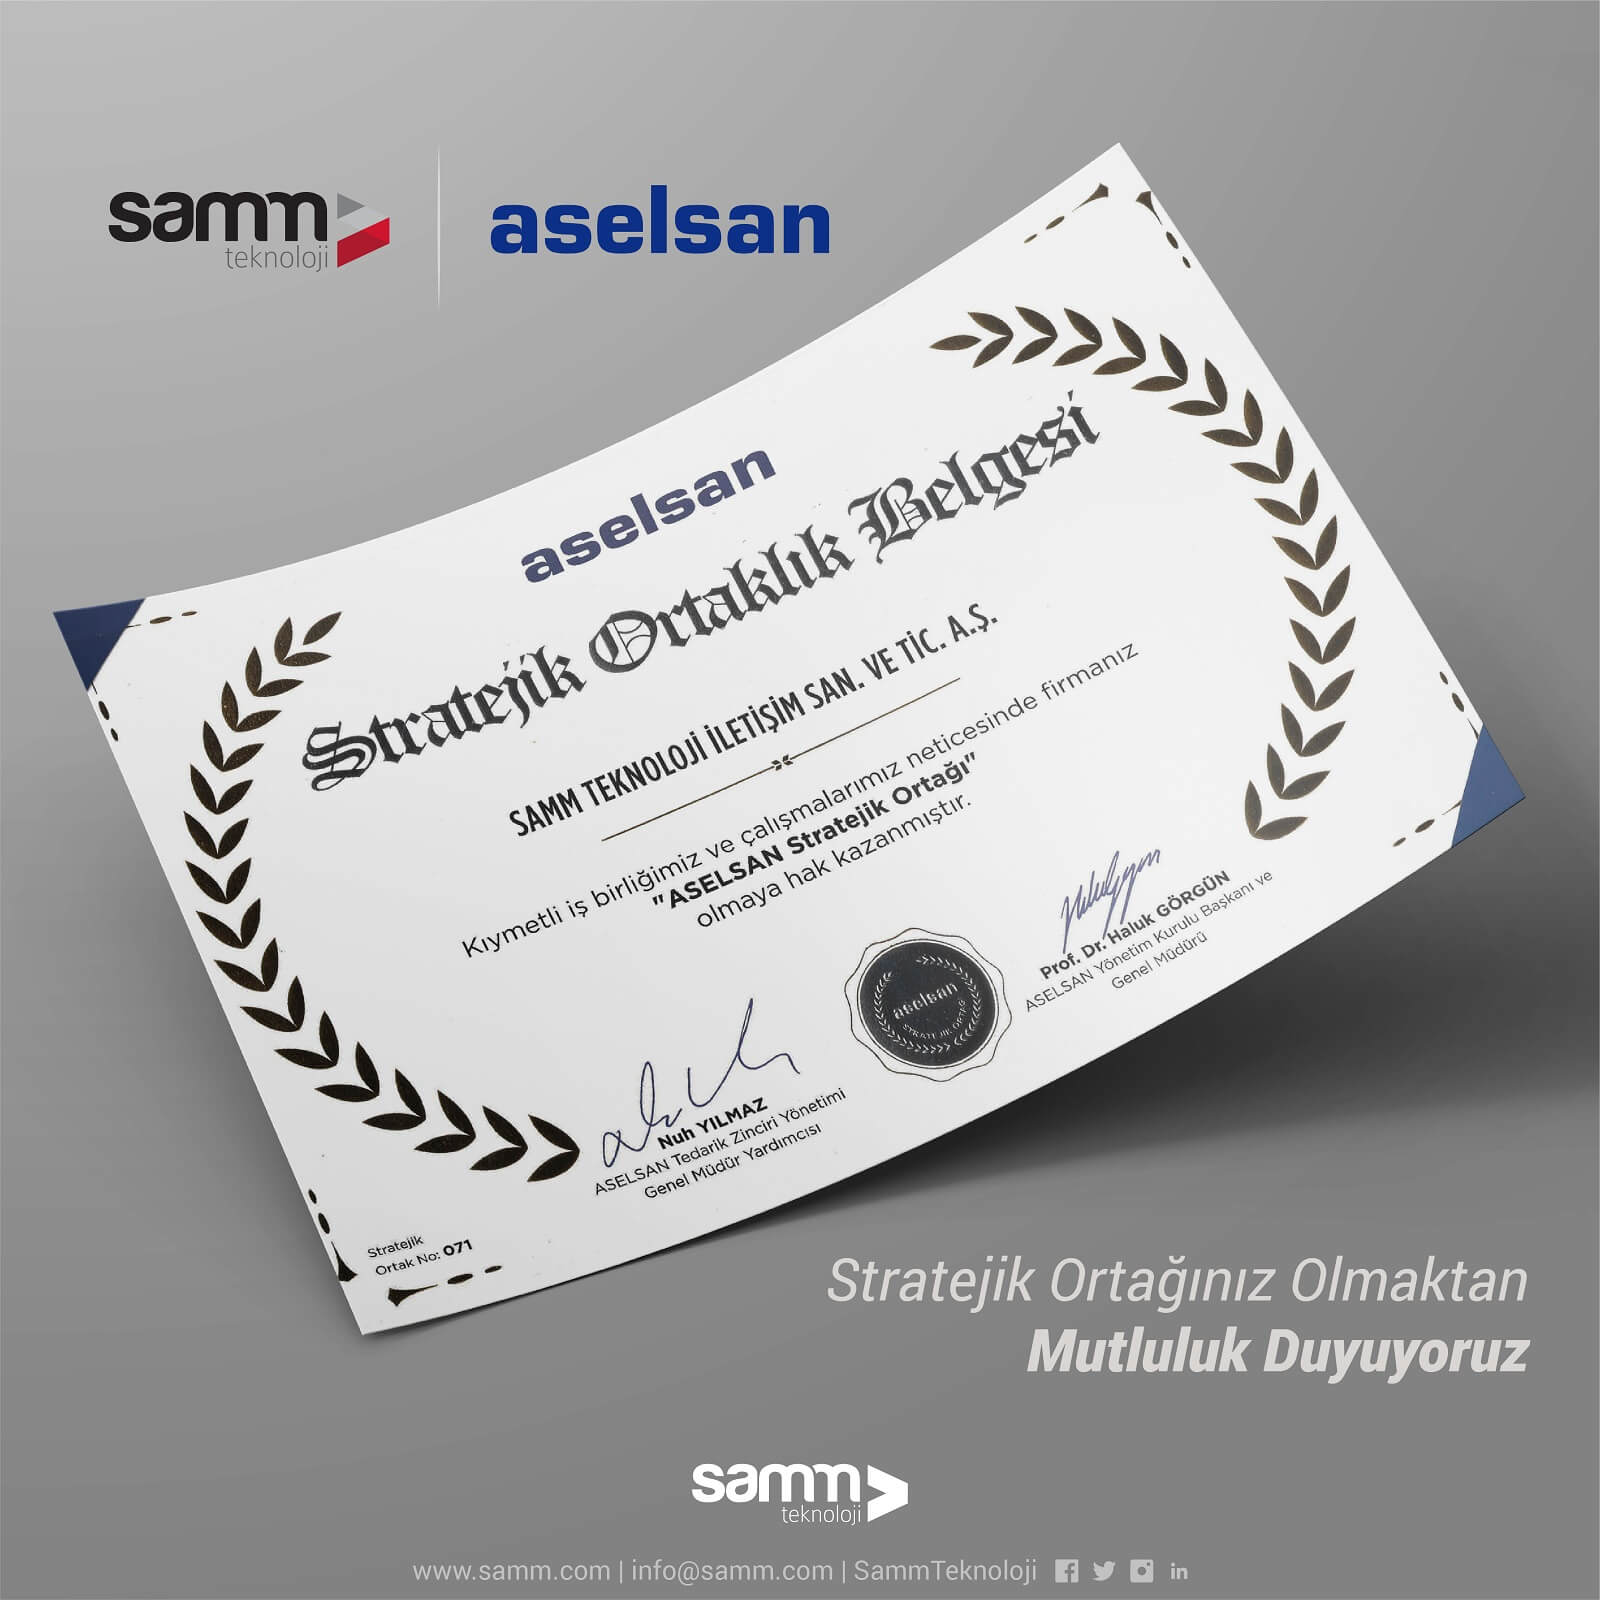 We Received a Strategic Partnership Certificate from Aselsan